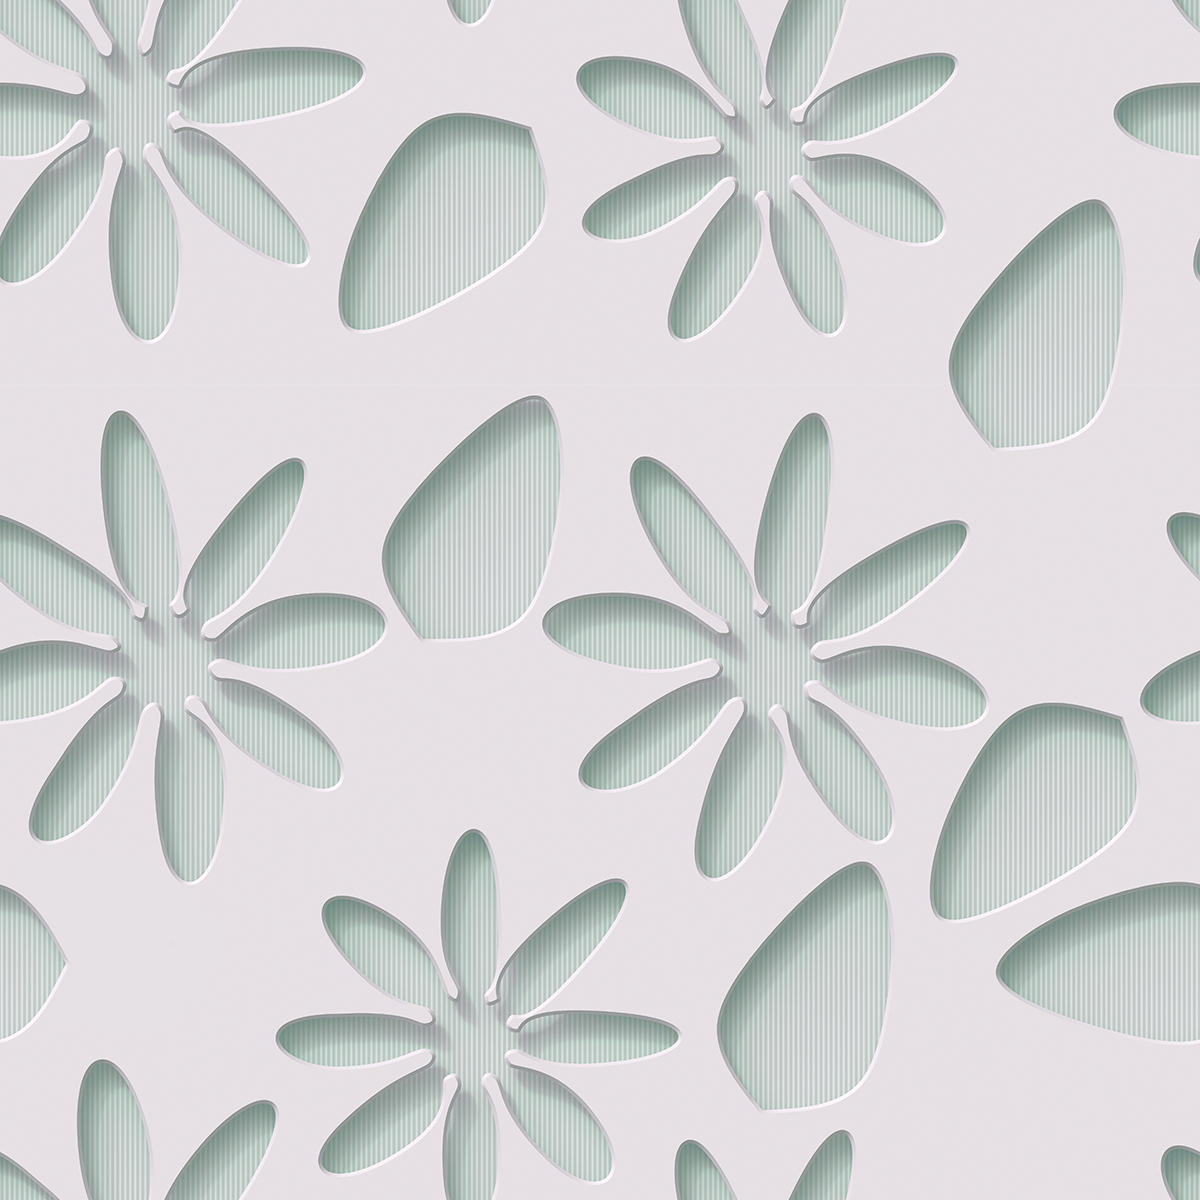 A white flower pattern with white lines